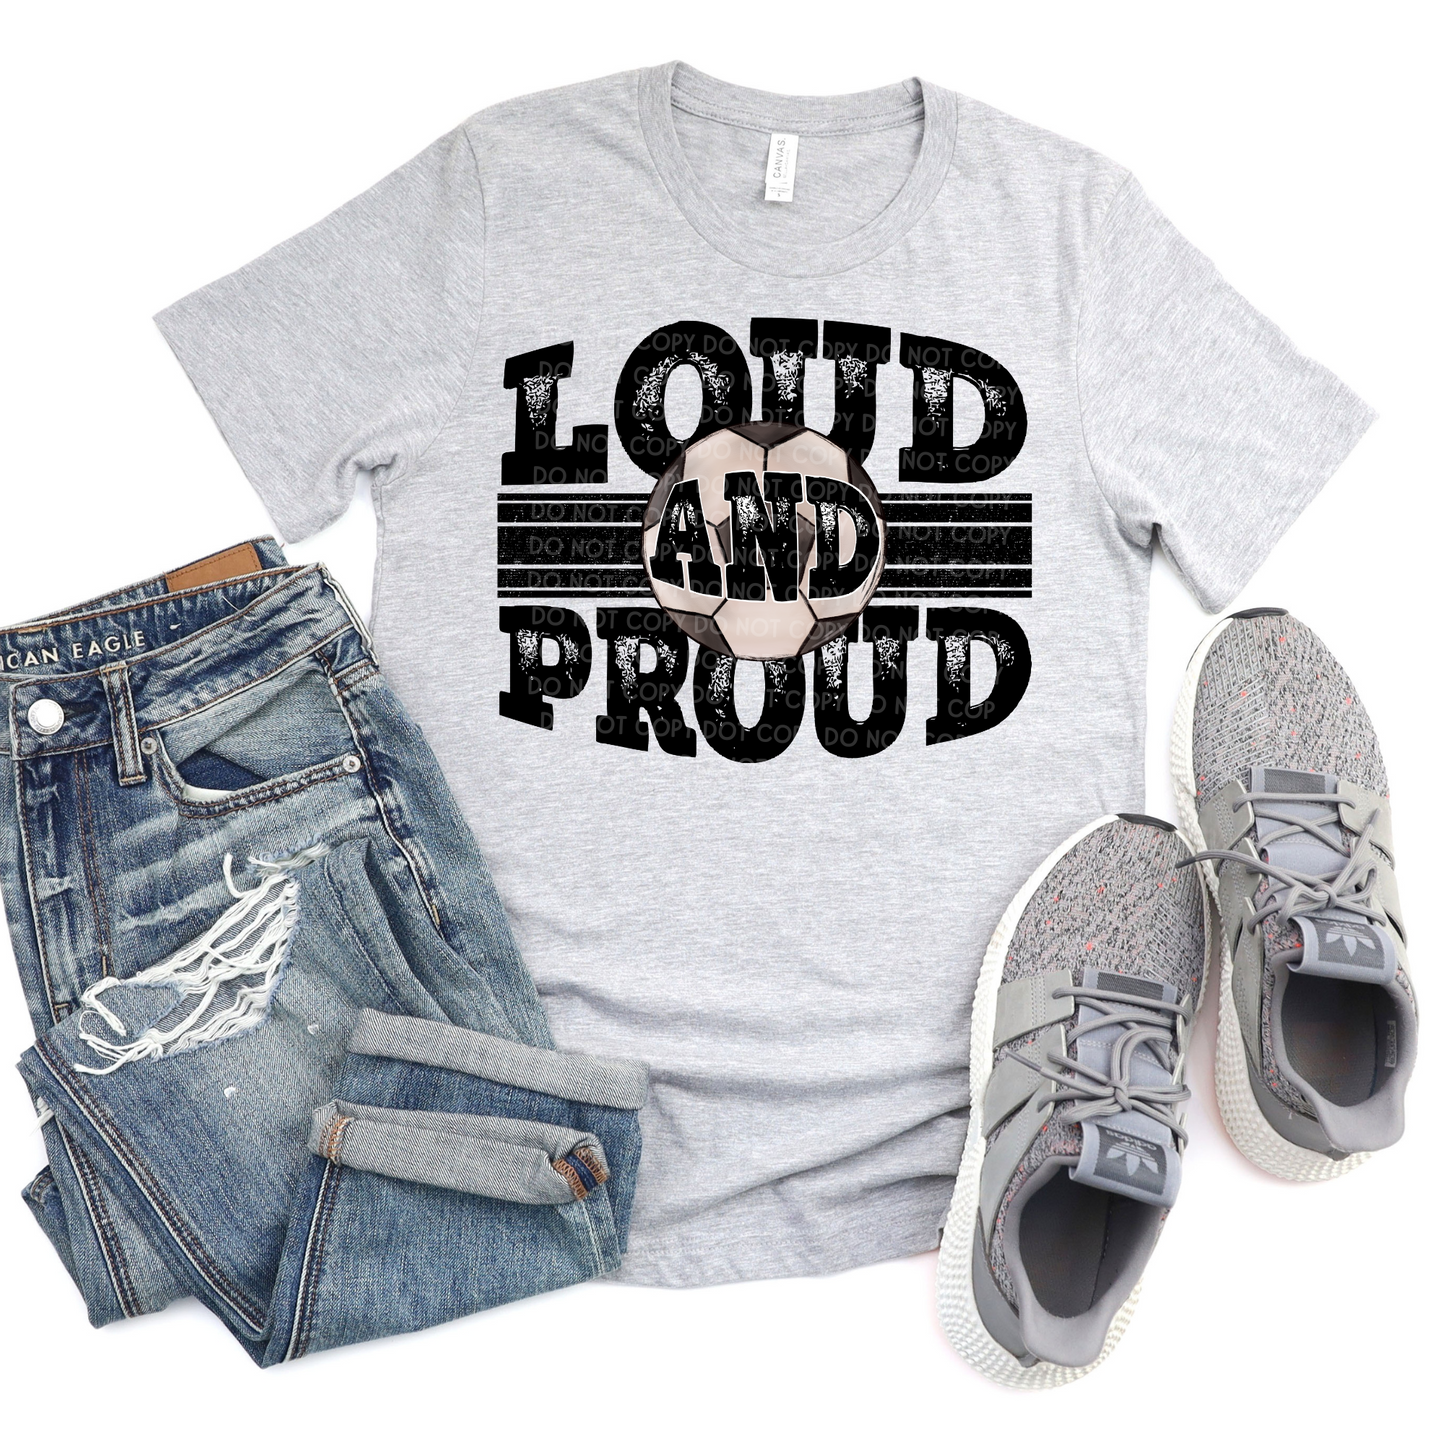 Soccer Loud and Proud - DTF TRANSFER 0650